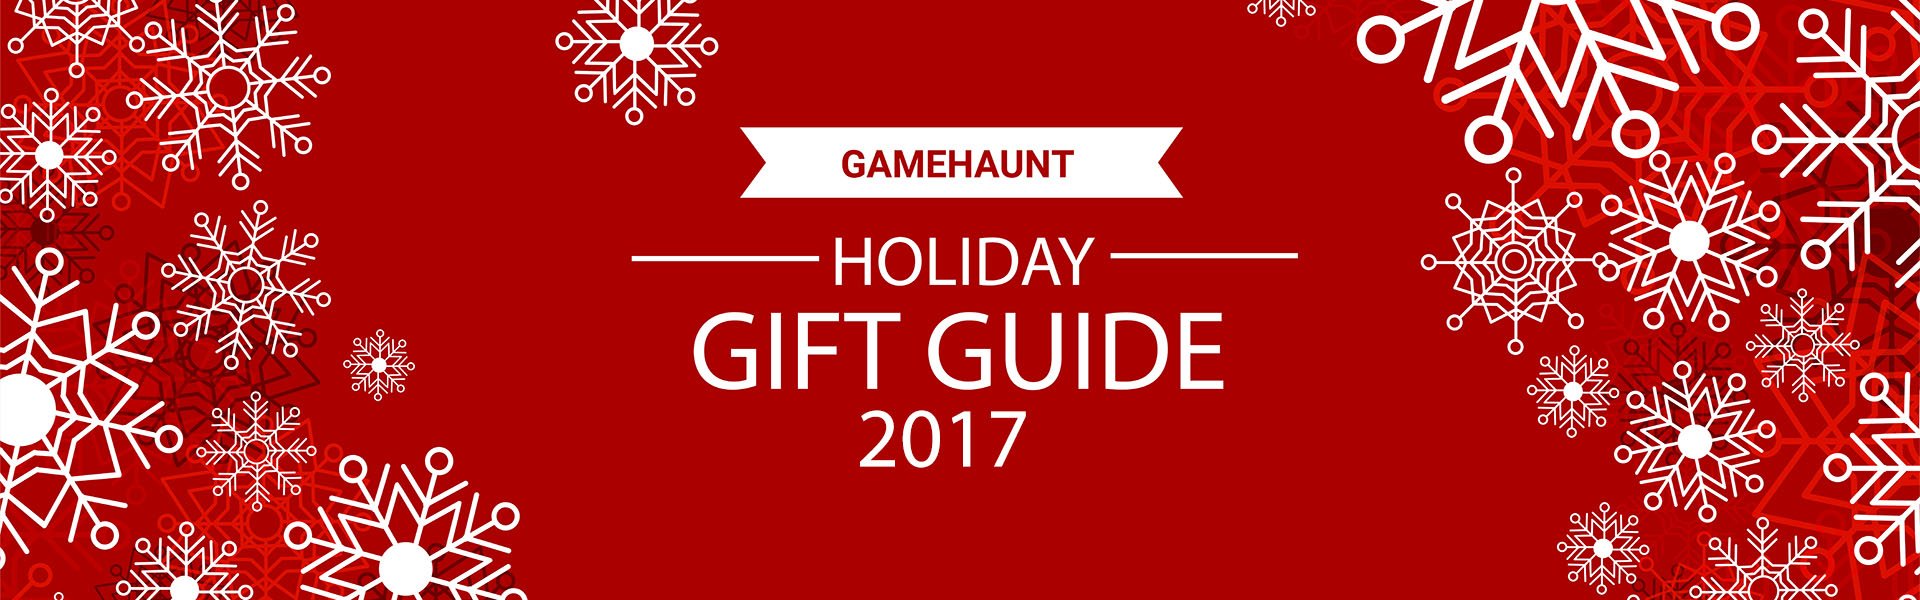 Holiday Gift Guide 2017 12